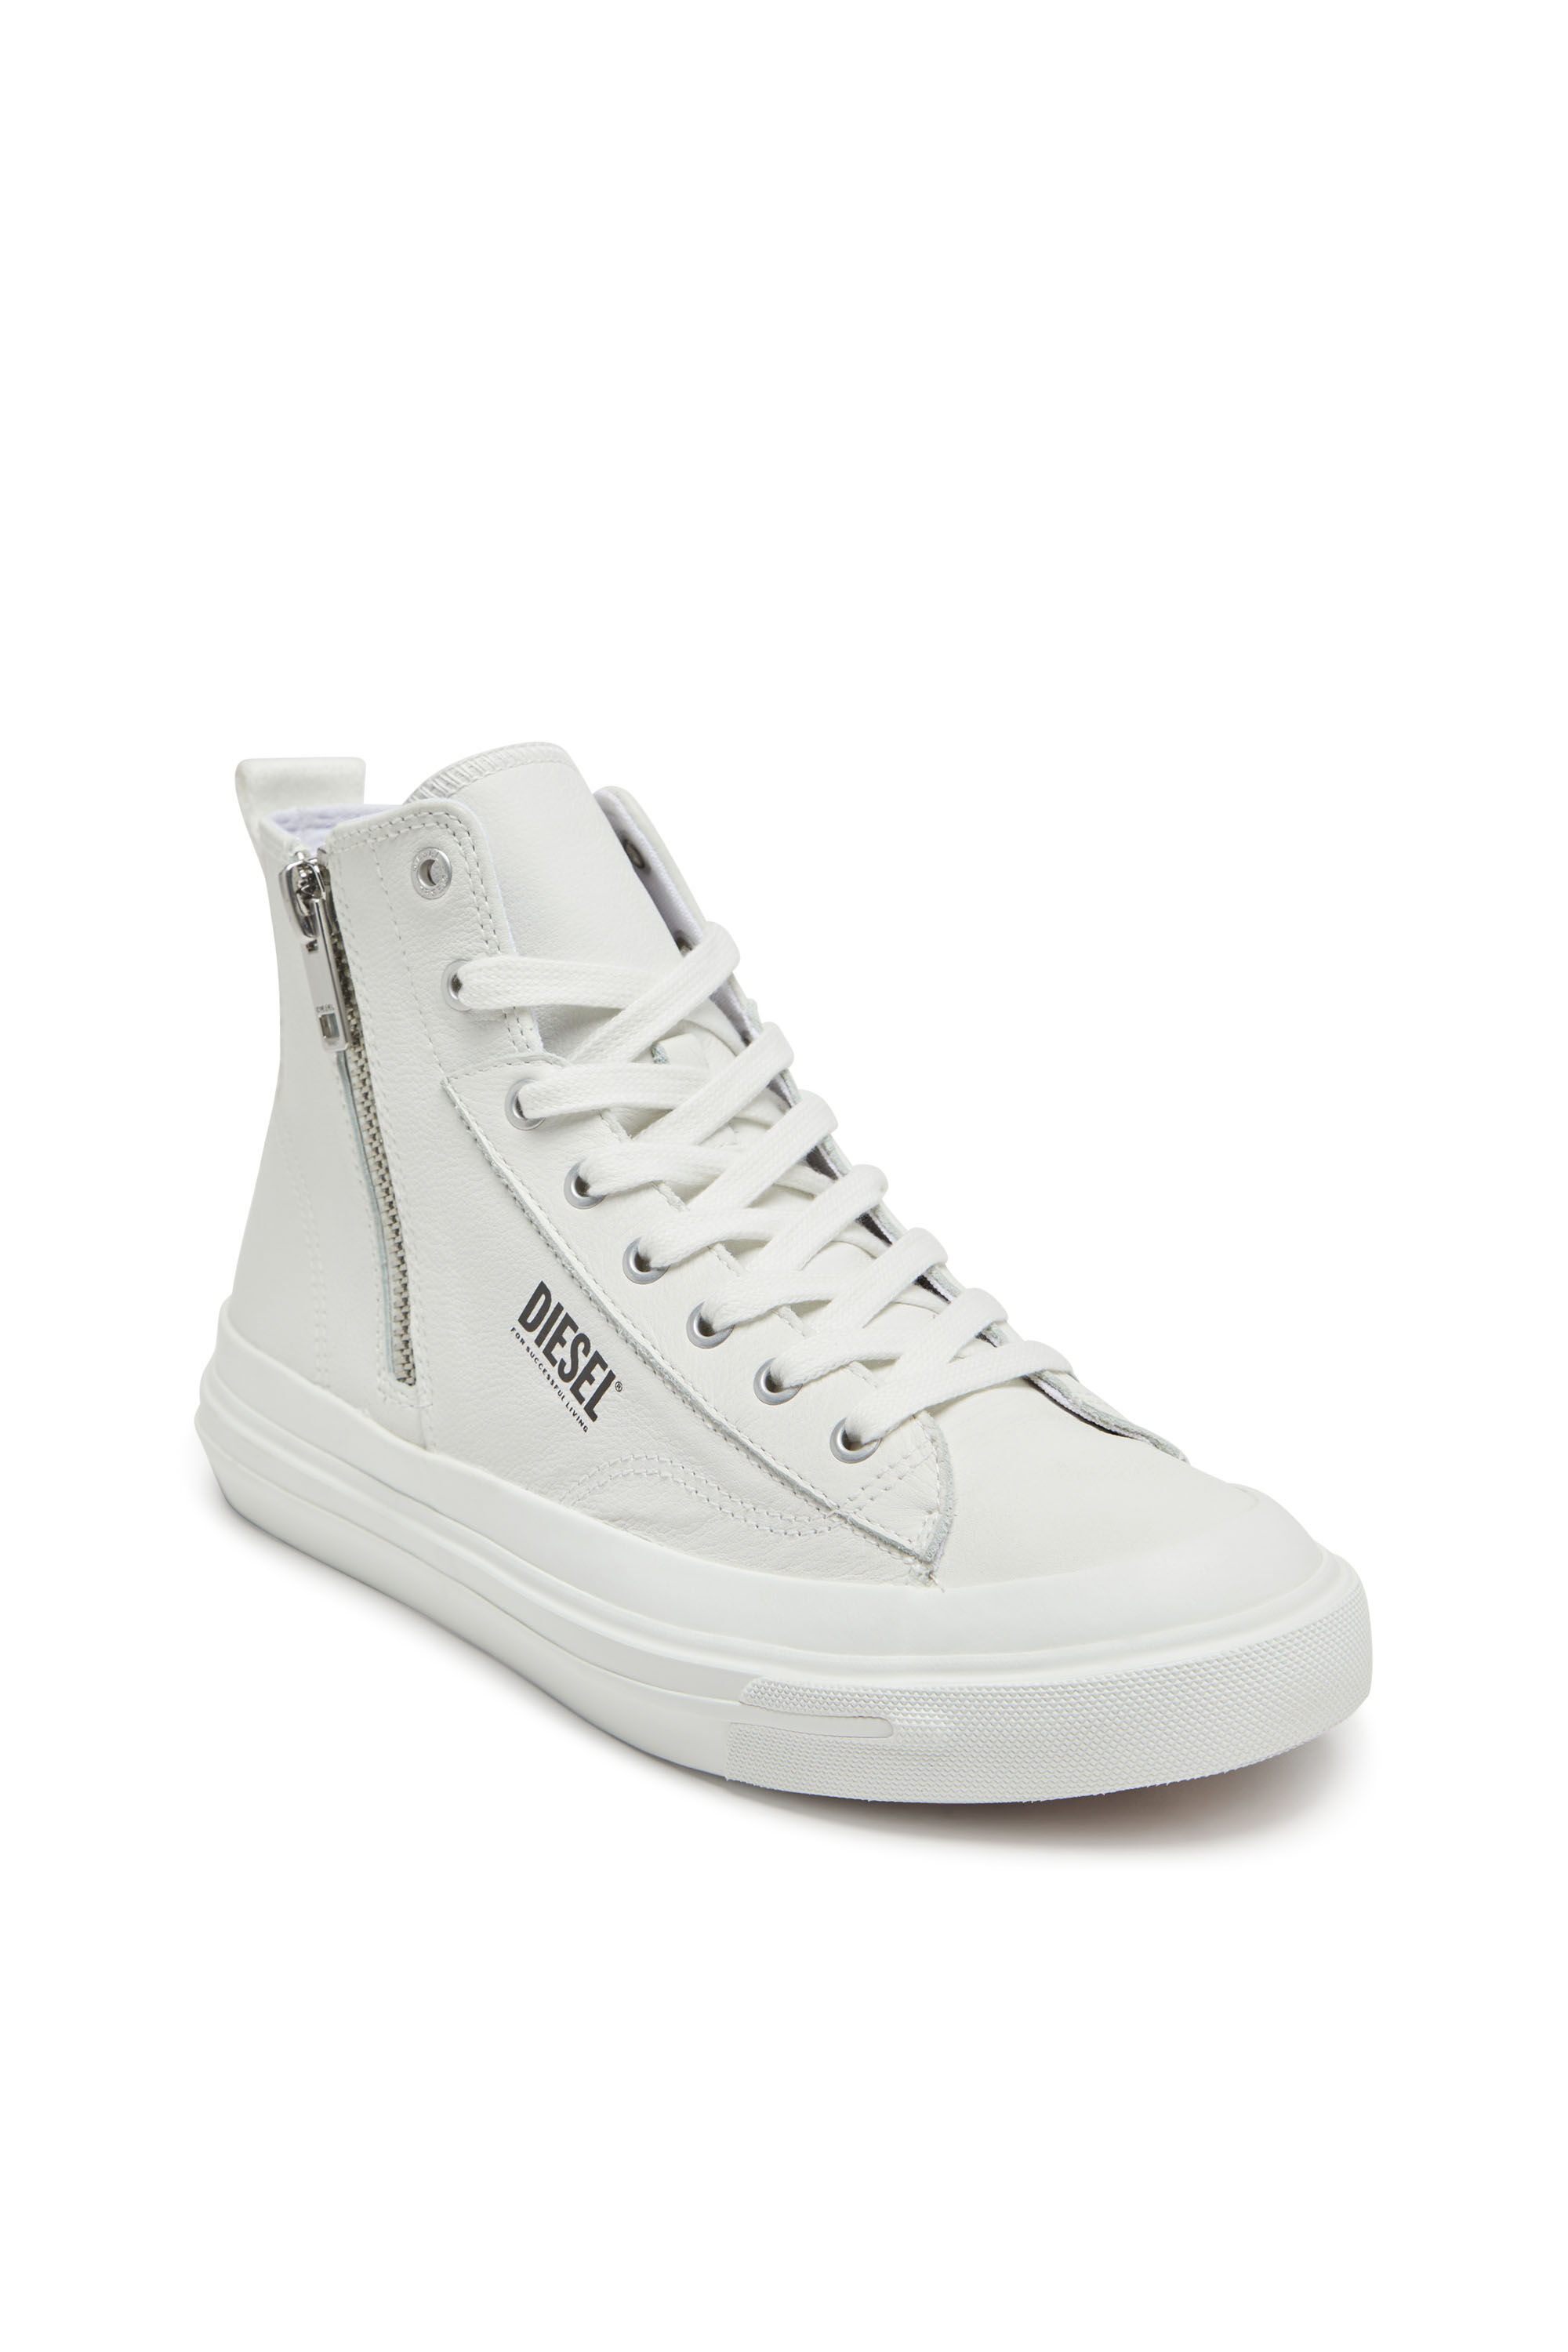 Men's S-Athos Dv Mid - High-top sneakers with side zip | S-ATHOS DV MID ...